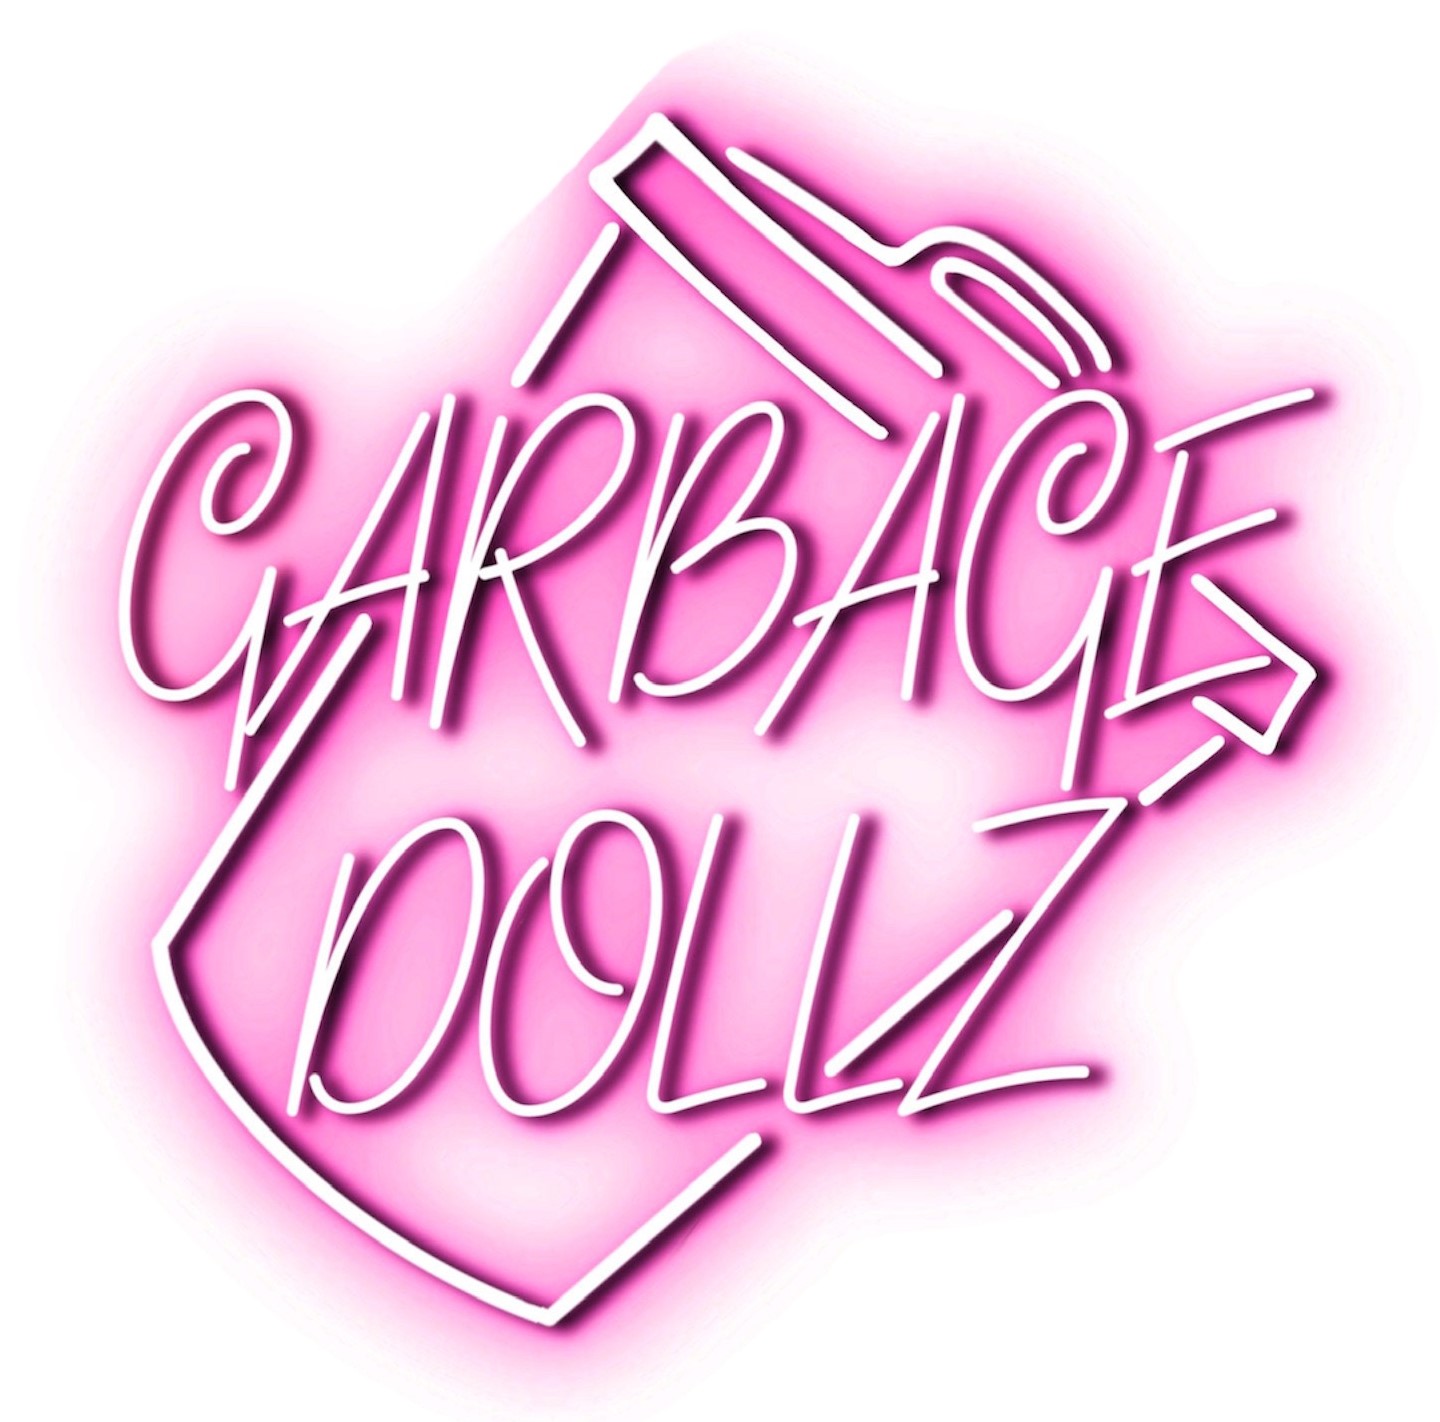 Roscoe's Chili Challenge welcomes Garbage Dollz!